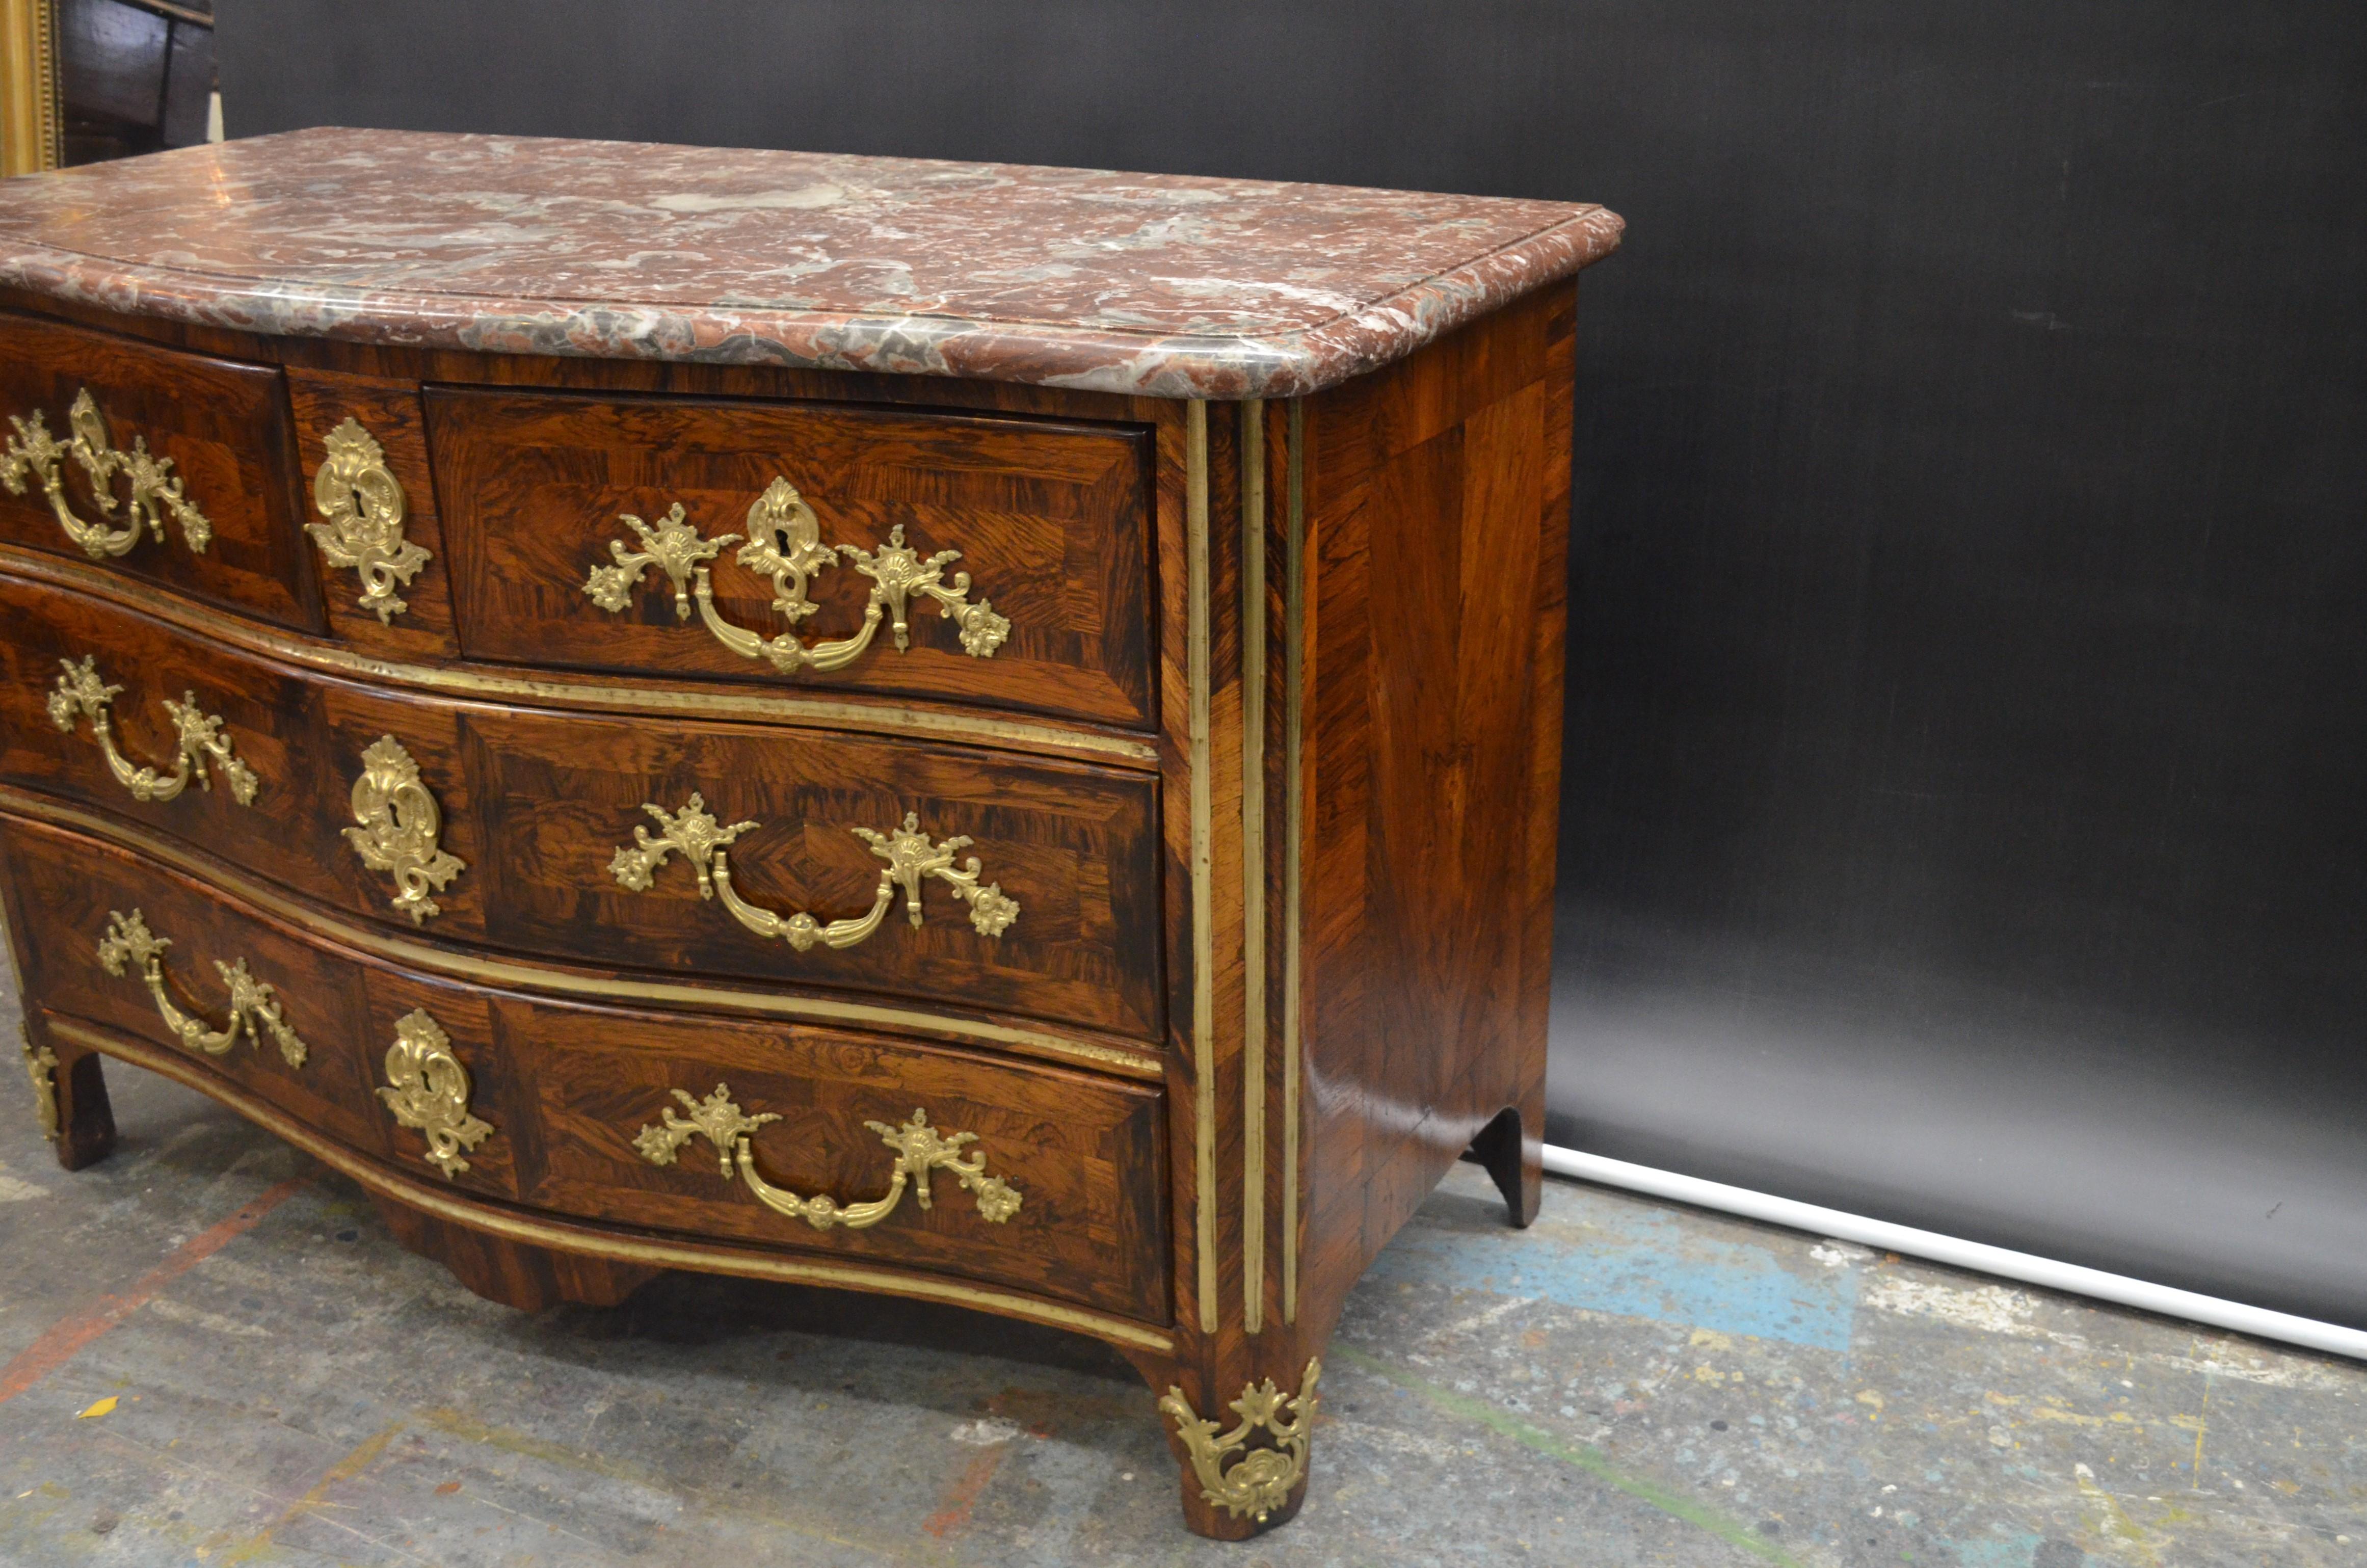 French Régence Ormolu-Mounted Rosewood & Kingwood Inlay Rouge Marble Top Commode For Sale 3